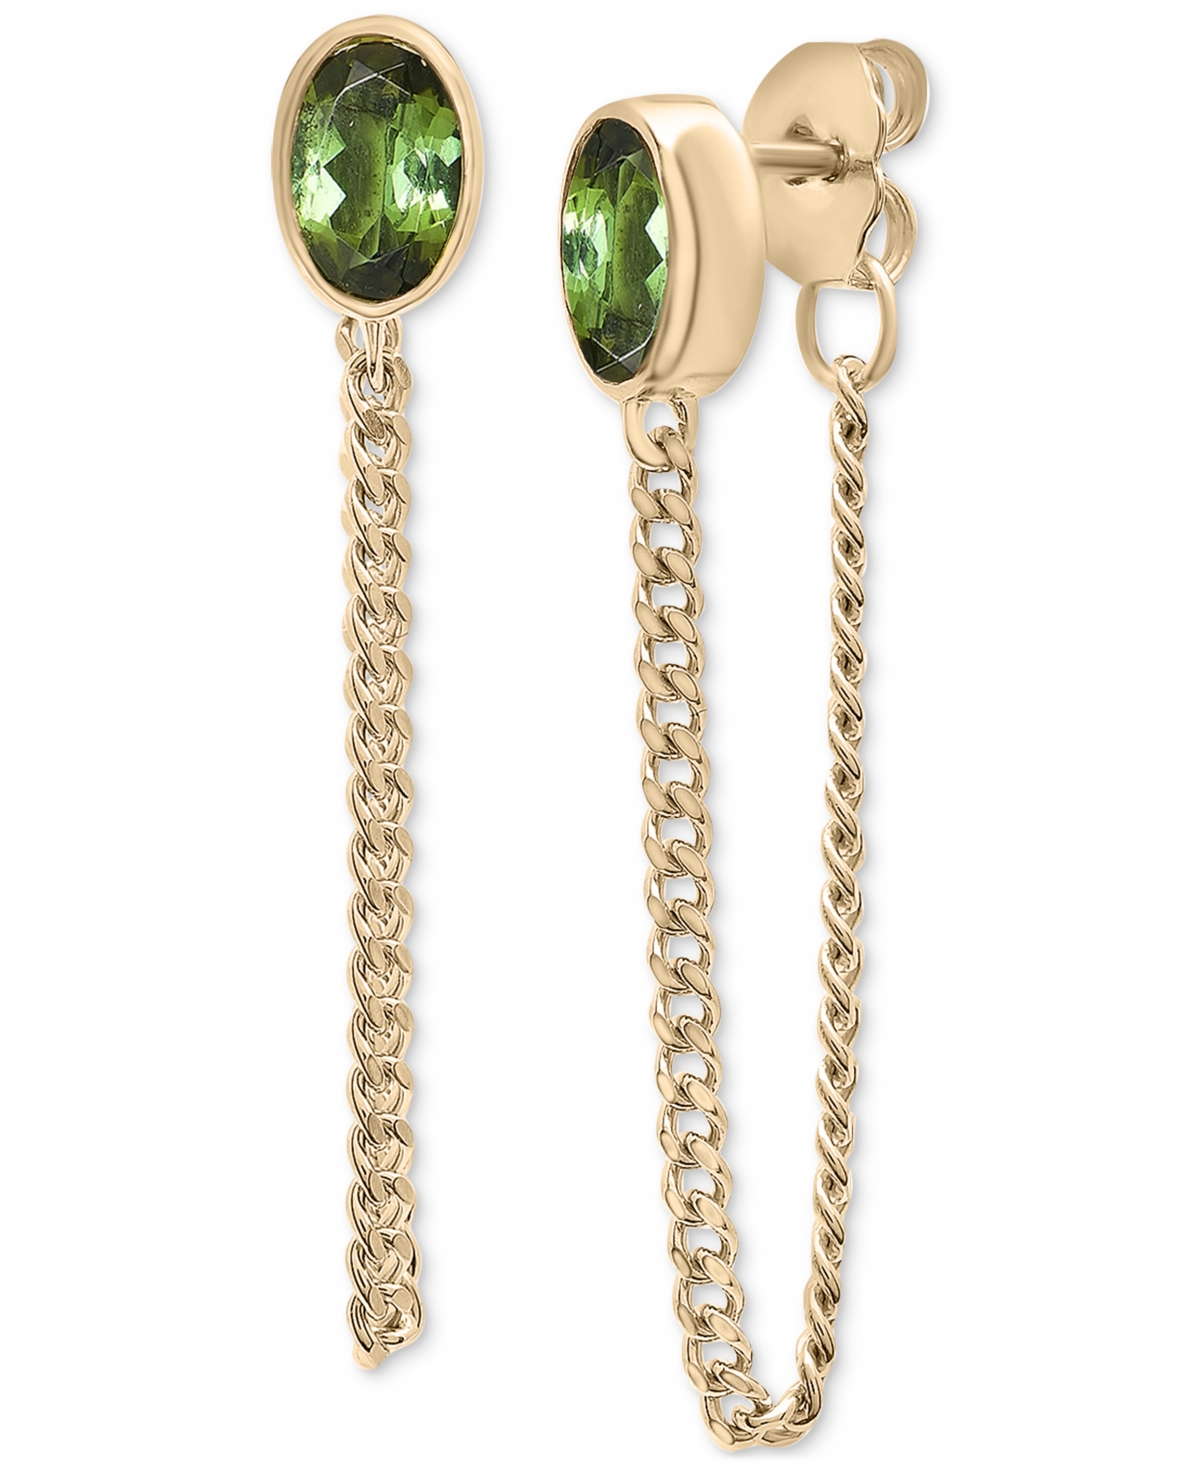 Green Tourmaline Chain Front to Back Drop Earrings (1/2 ct. t.w.) in Gold Vermeil, Created for Macy's - Gold Vermeil